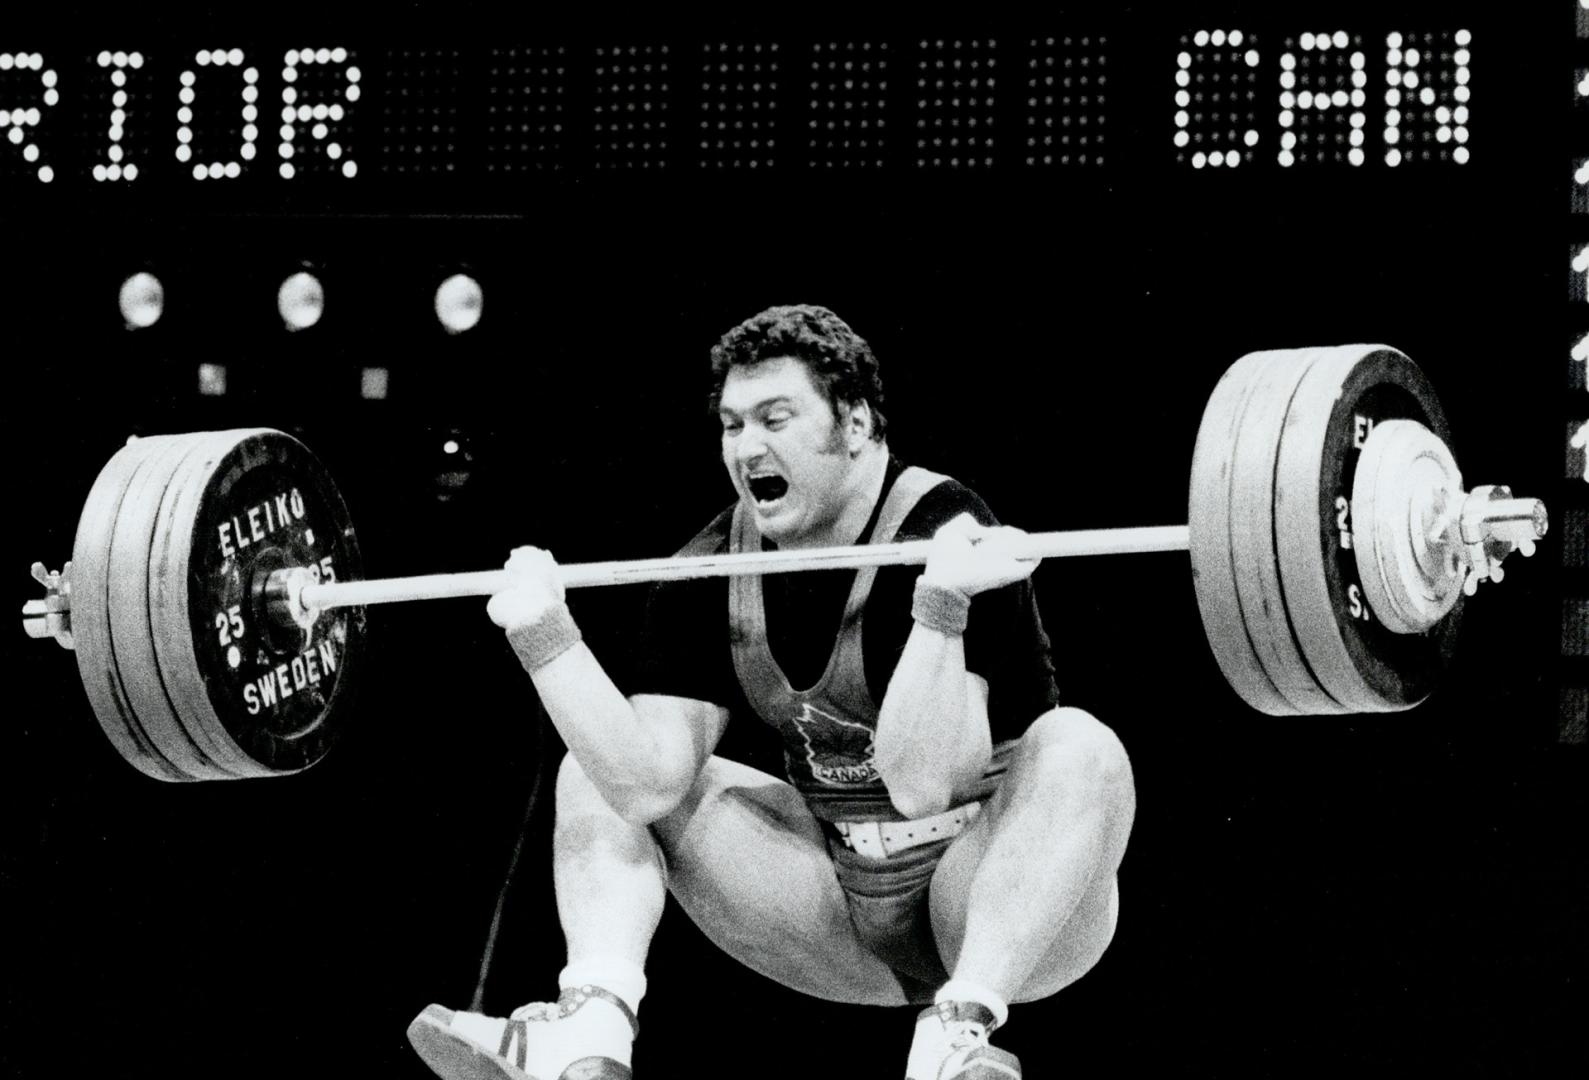 He tried hard but......Russ Prior got the Gold Medal in the IIO kg class but tried in vain to make a Commonwealth record of 205.5 kilo as he goes down with a yell